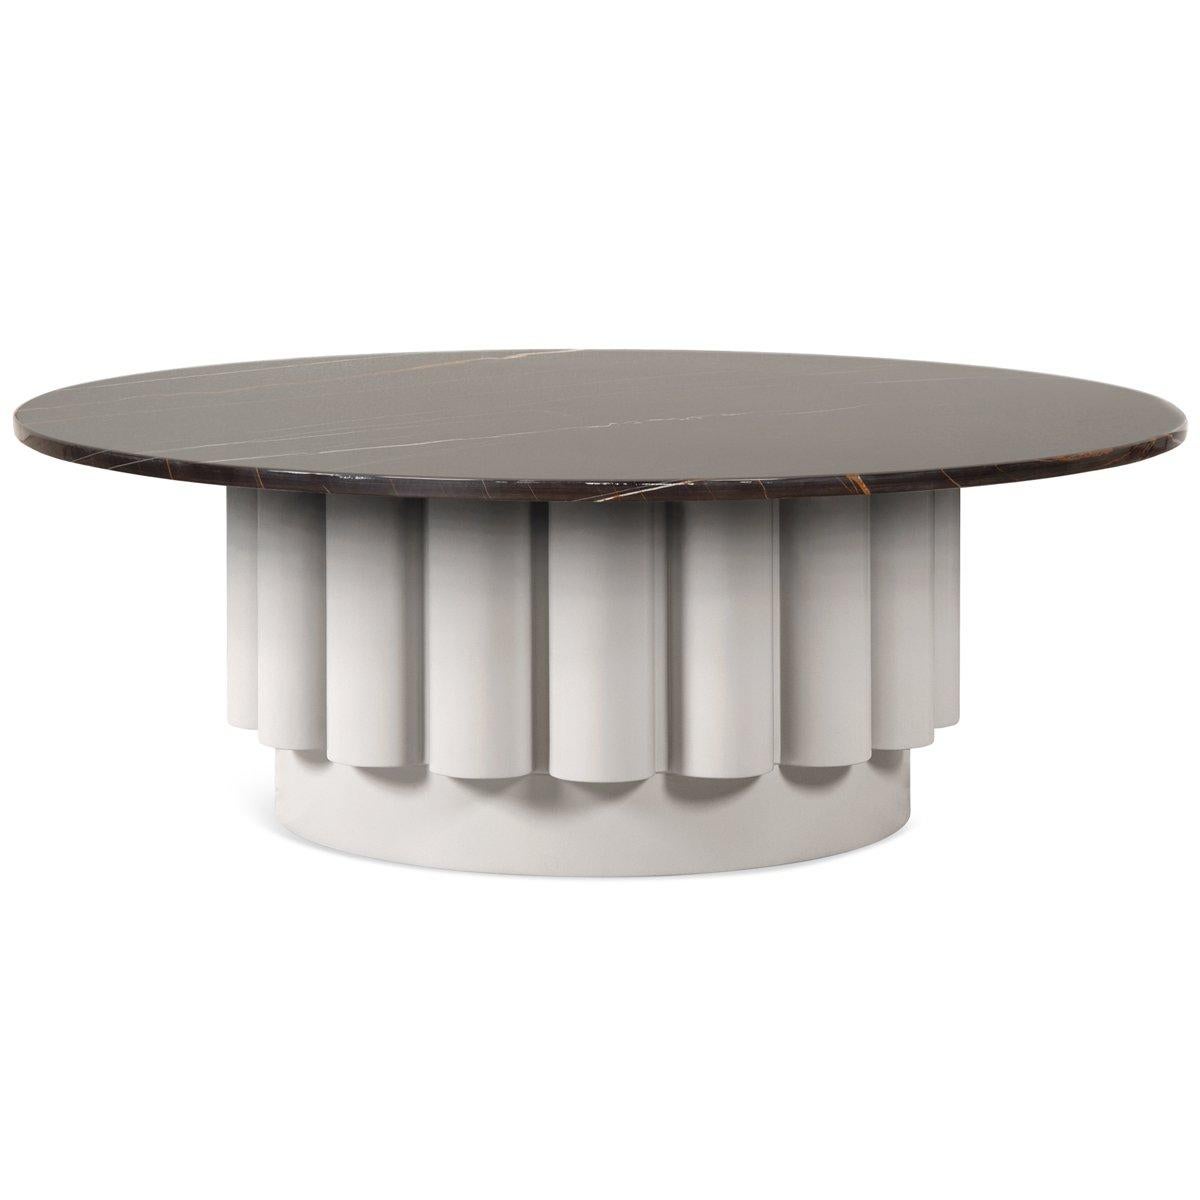 For those wanting a stunning center-piece for a living room or lobby. A fluted base in smoke ember lacquer finish is the most distinctive design element of this customizable coffee table. The posh Dark River stone marble top is dramatic and